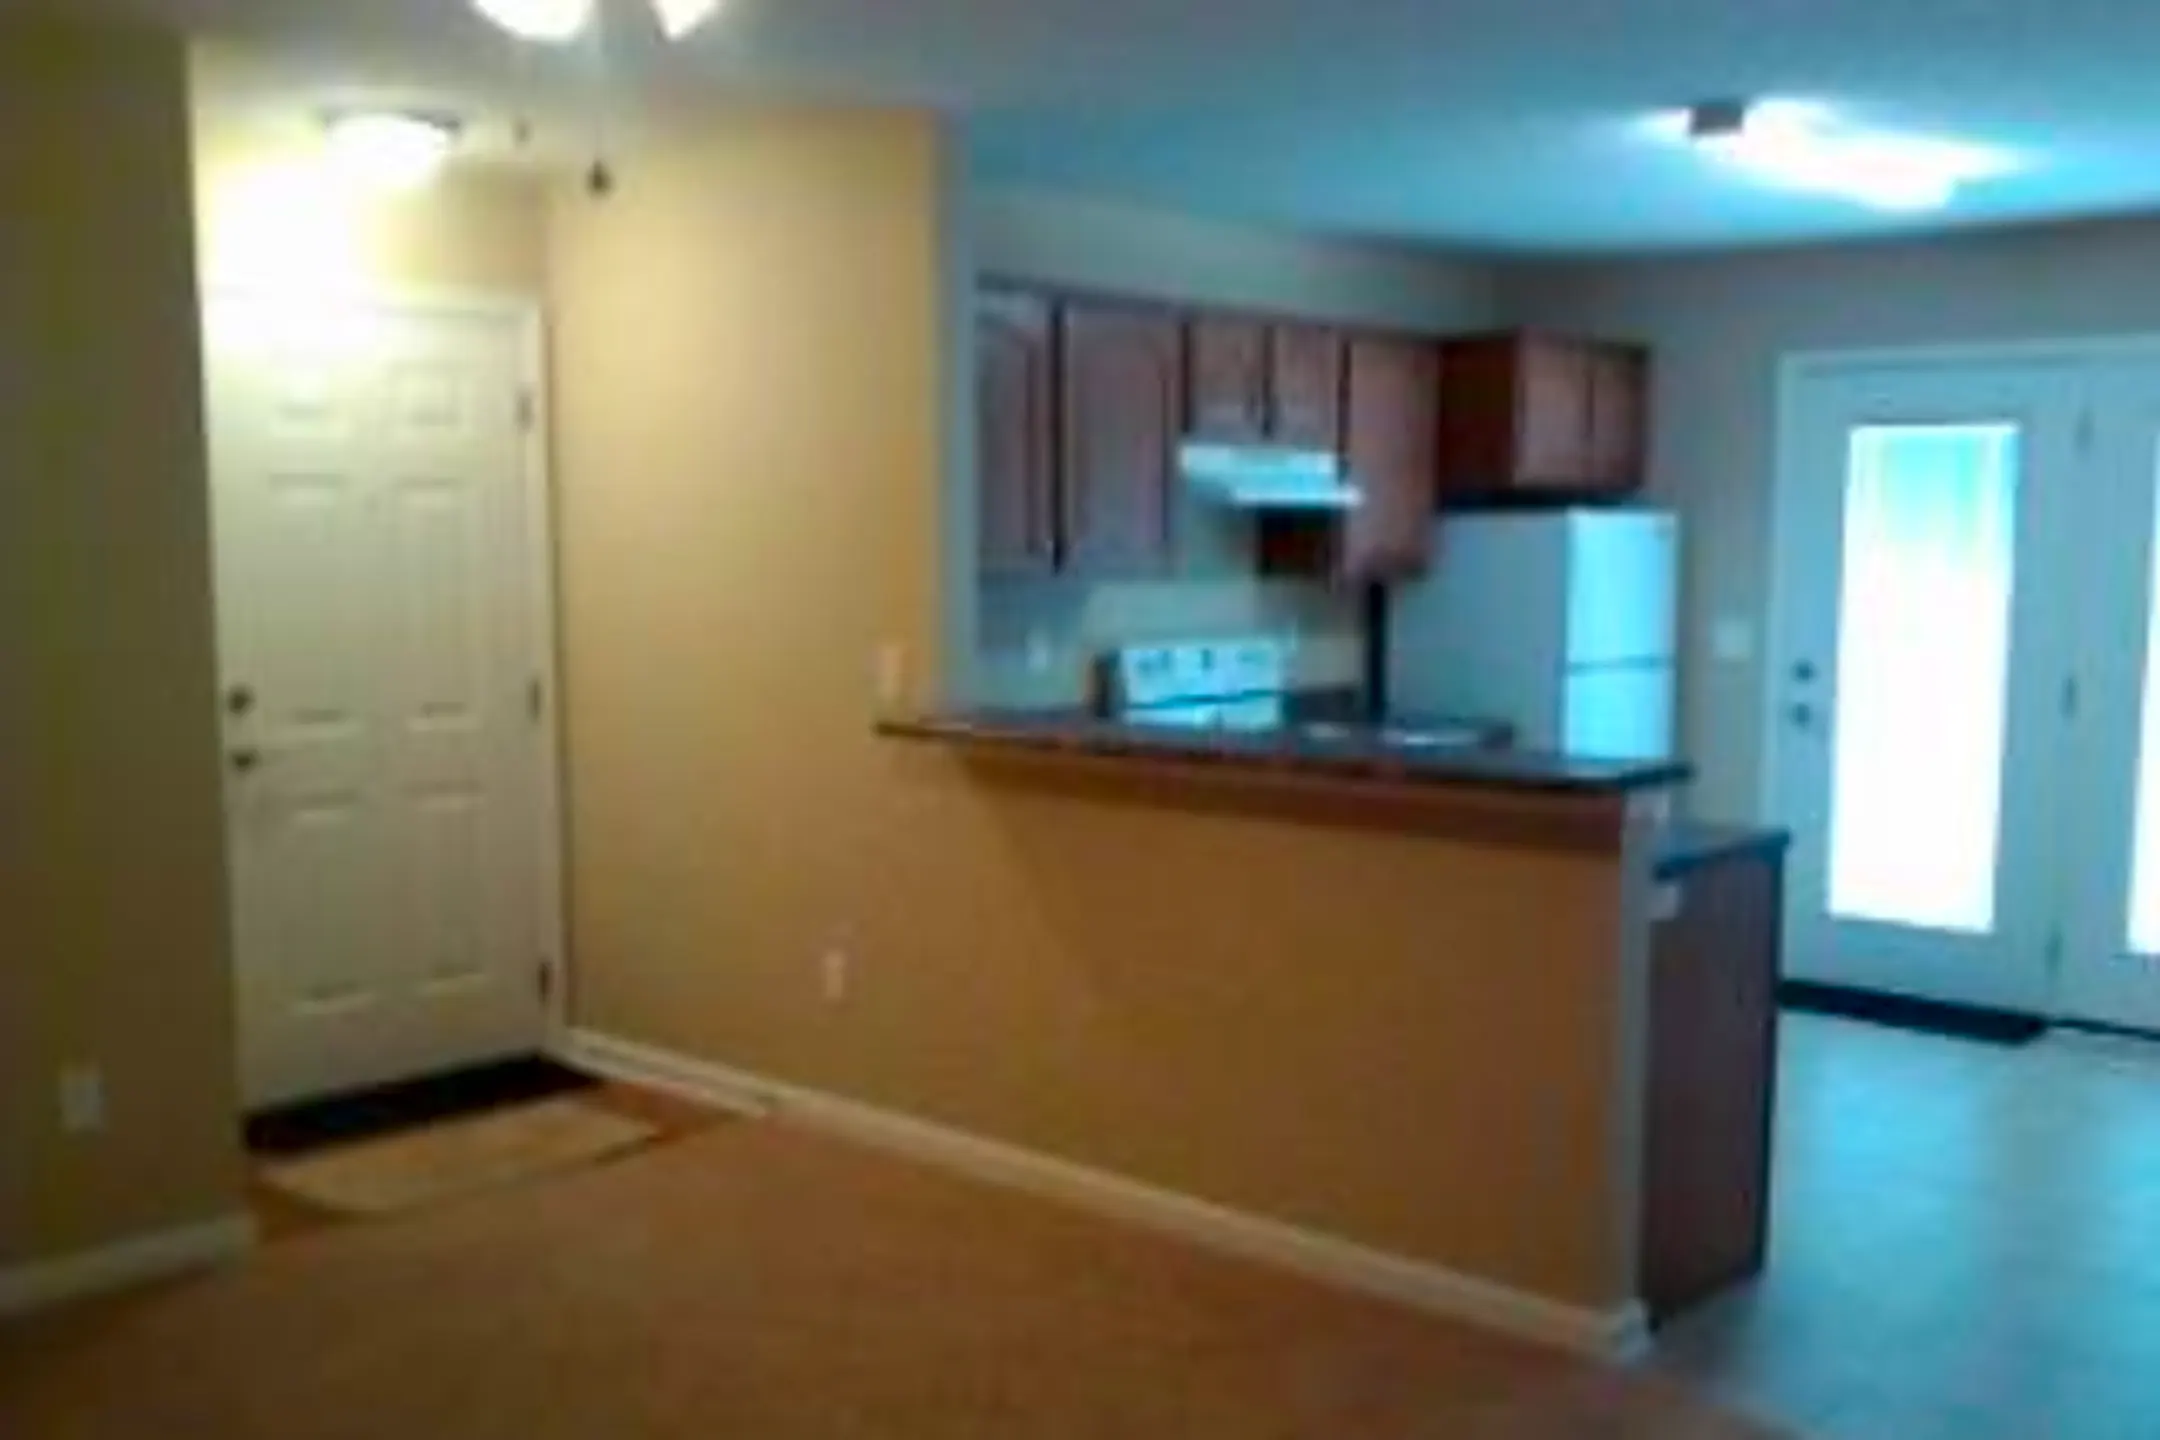 Kitchen - 6801 W Pages Ln - Louisville, KY